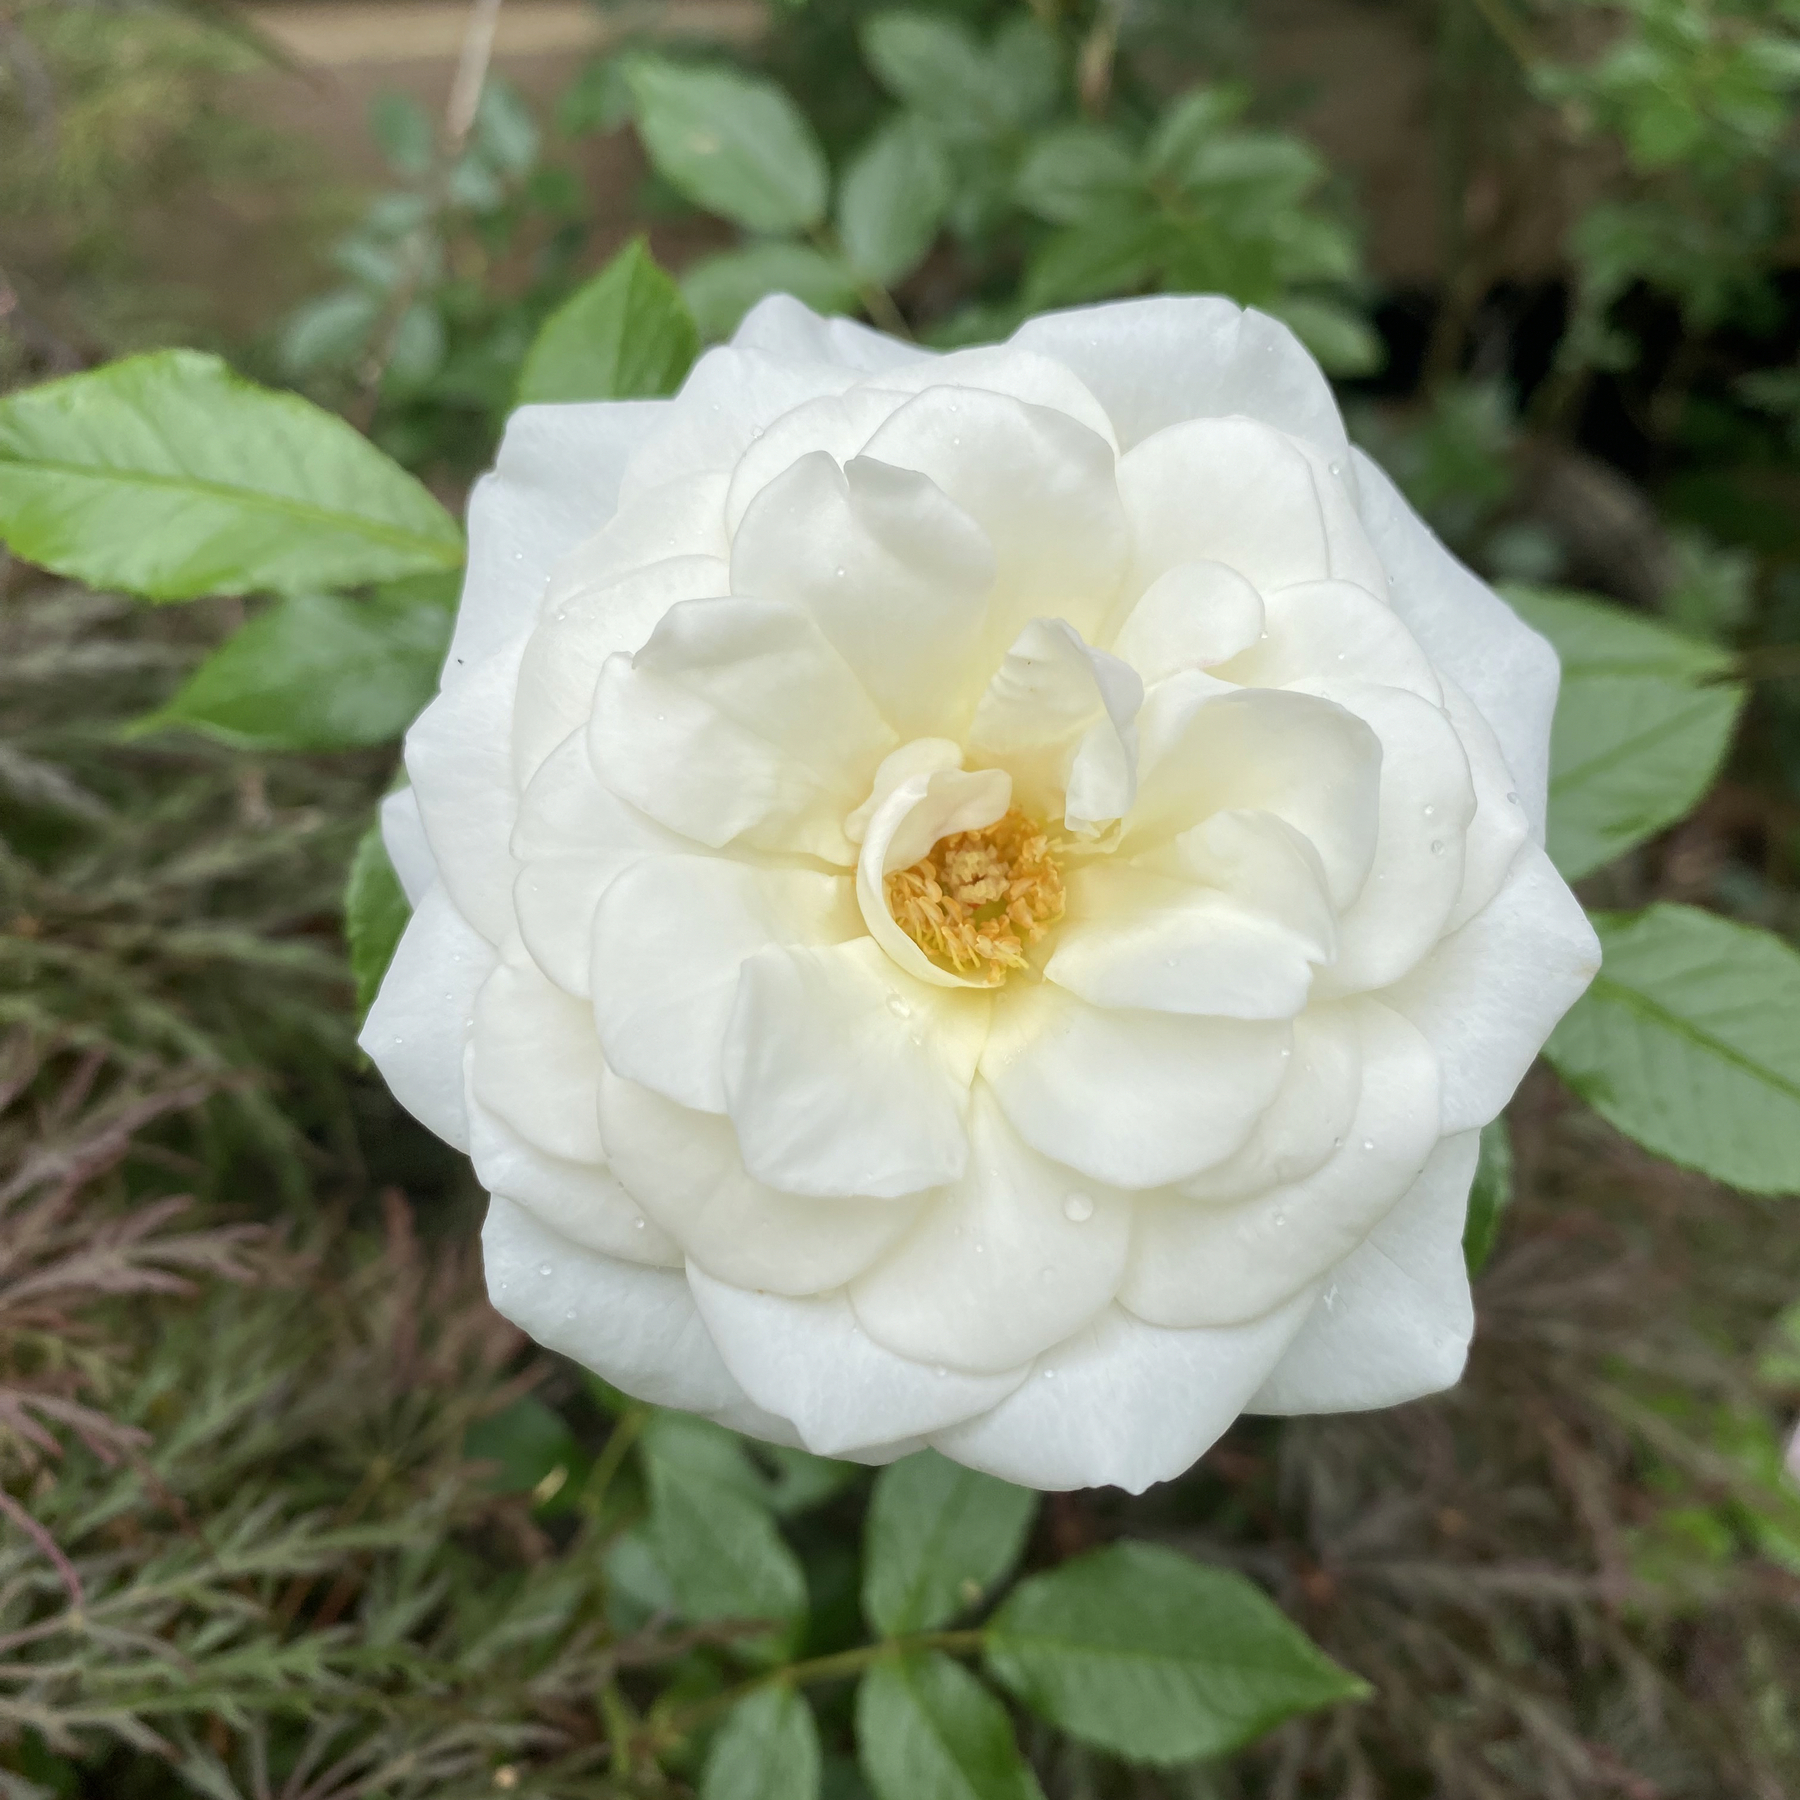 Same white rose one day later. Fully open. Beautiful.